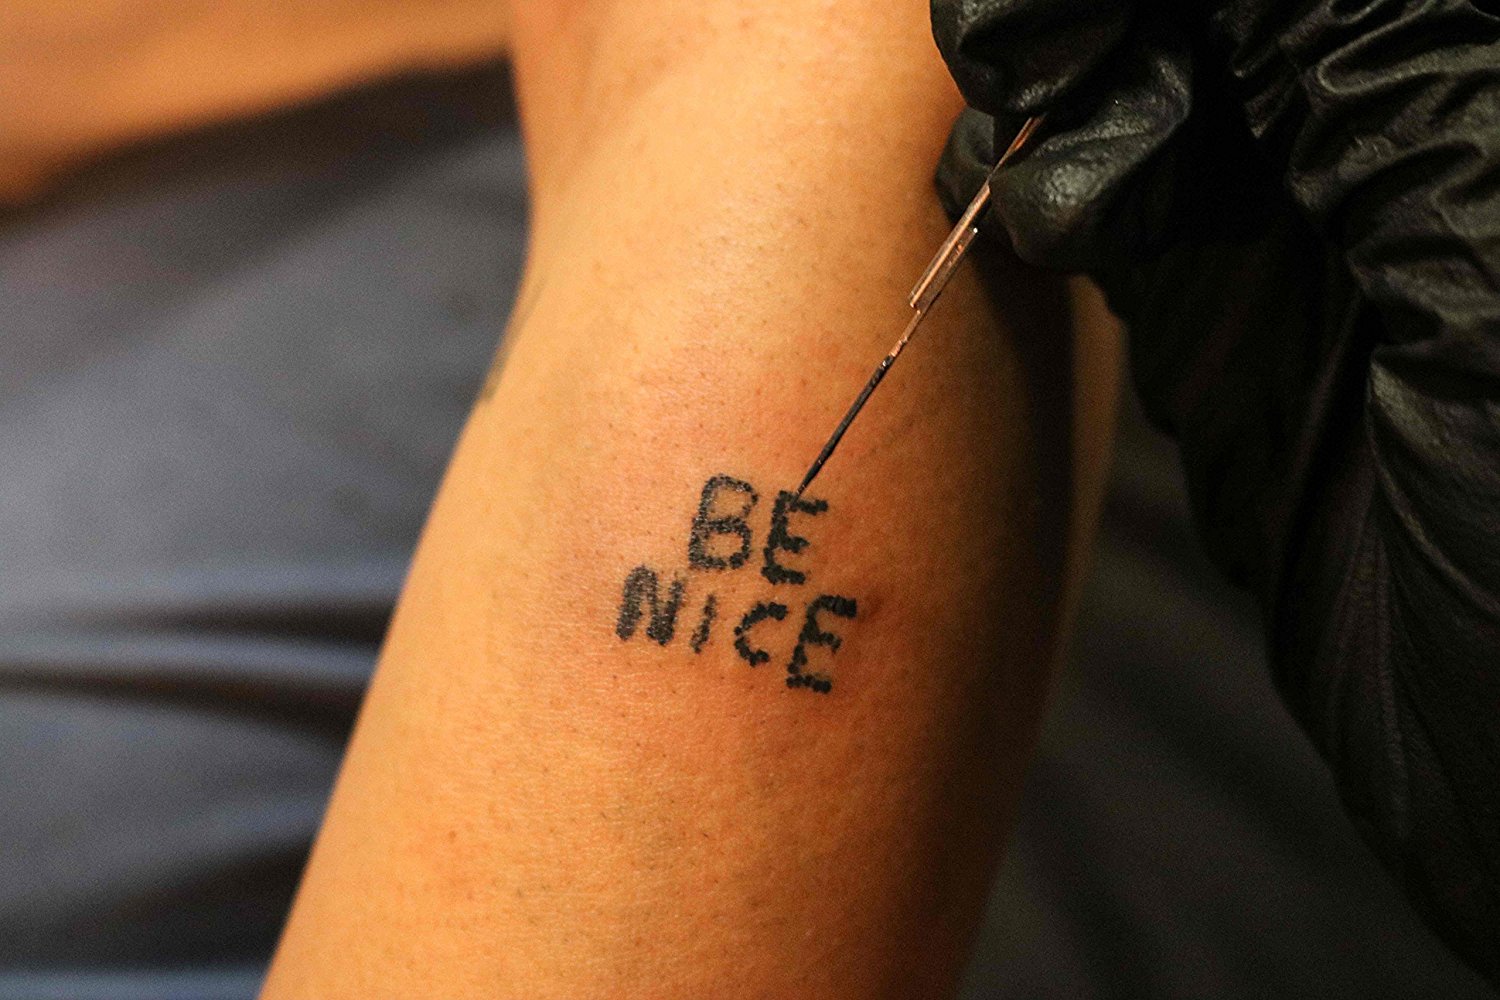 How To Get Rid Of A Stick And Poke?